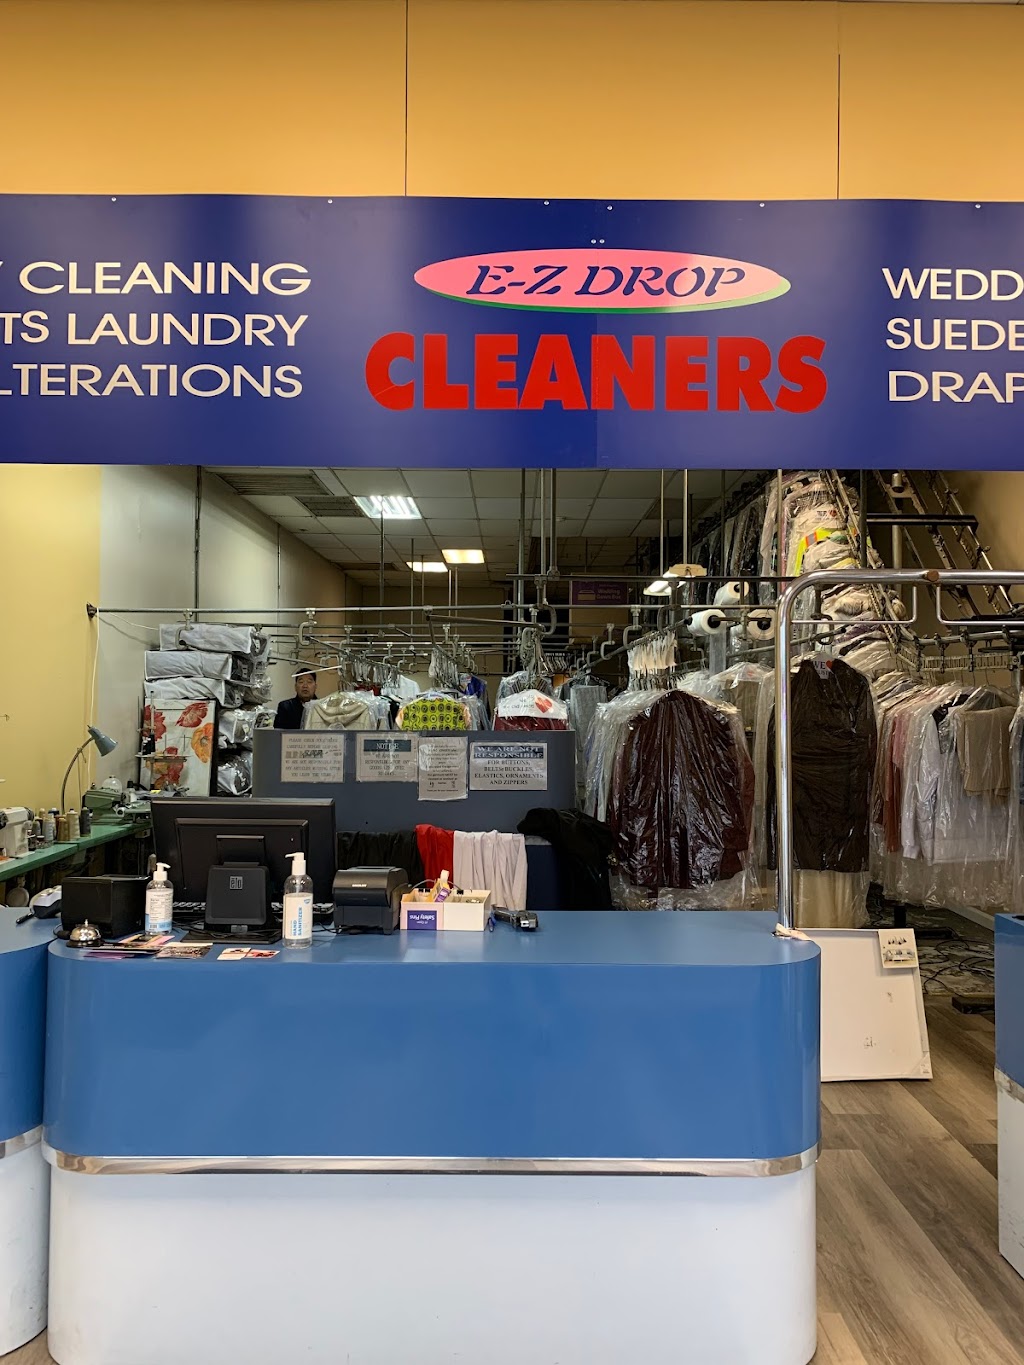 King Custom Cleaners and Tailor | Kennedy Shopping Center, 400 John F Kennedy Way # 110, Willingboro, NJ 08046 | Phone: (609) 877-9895